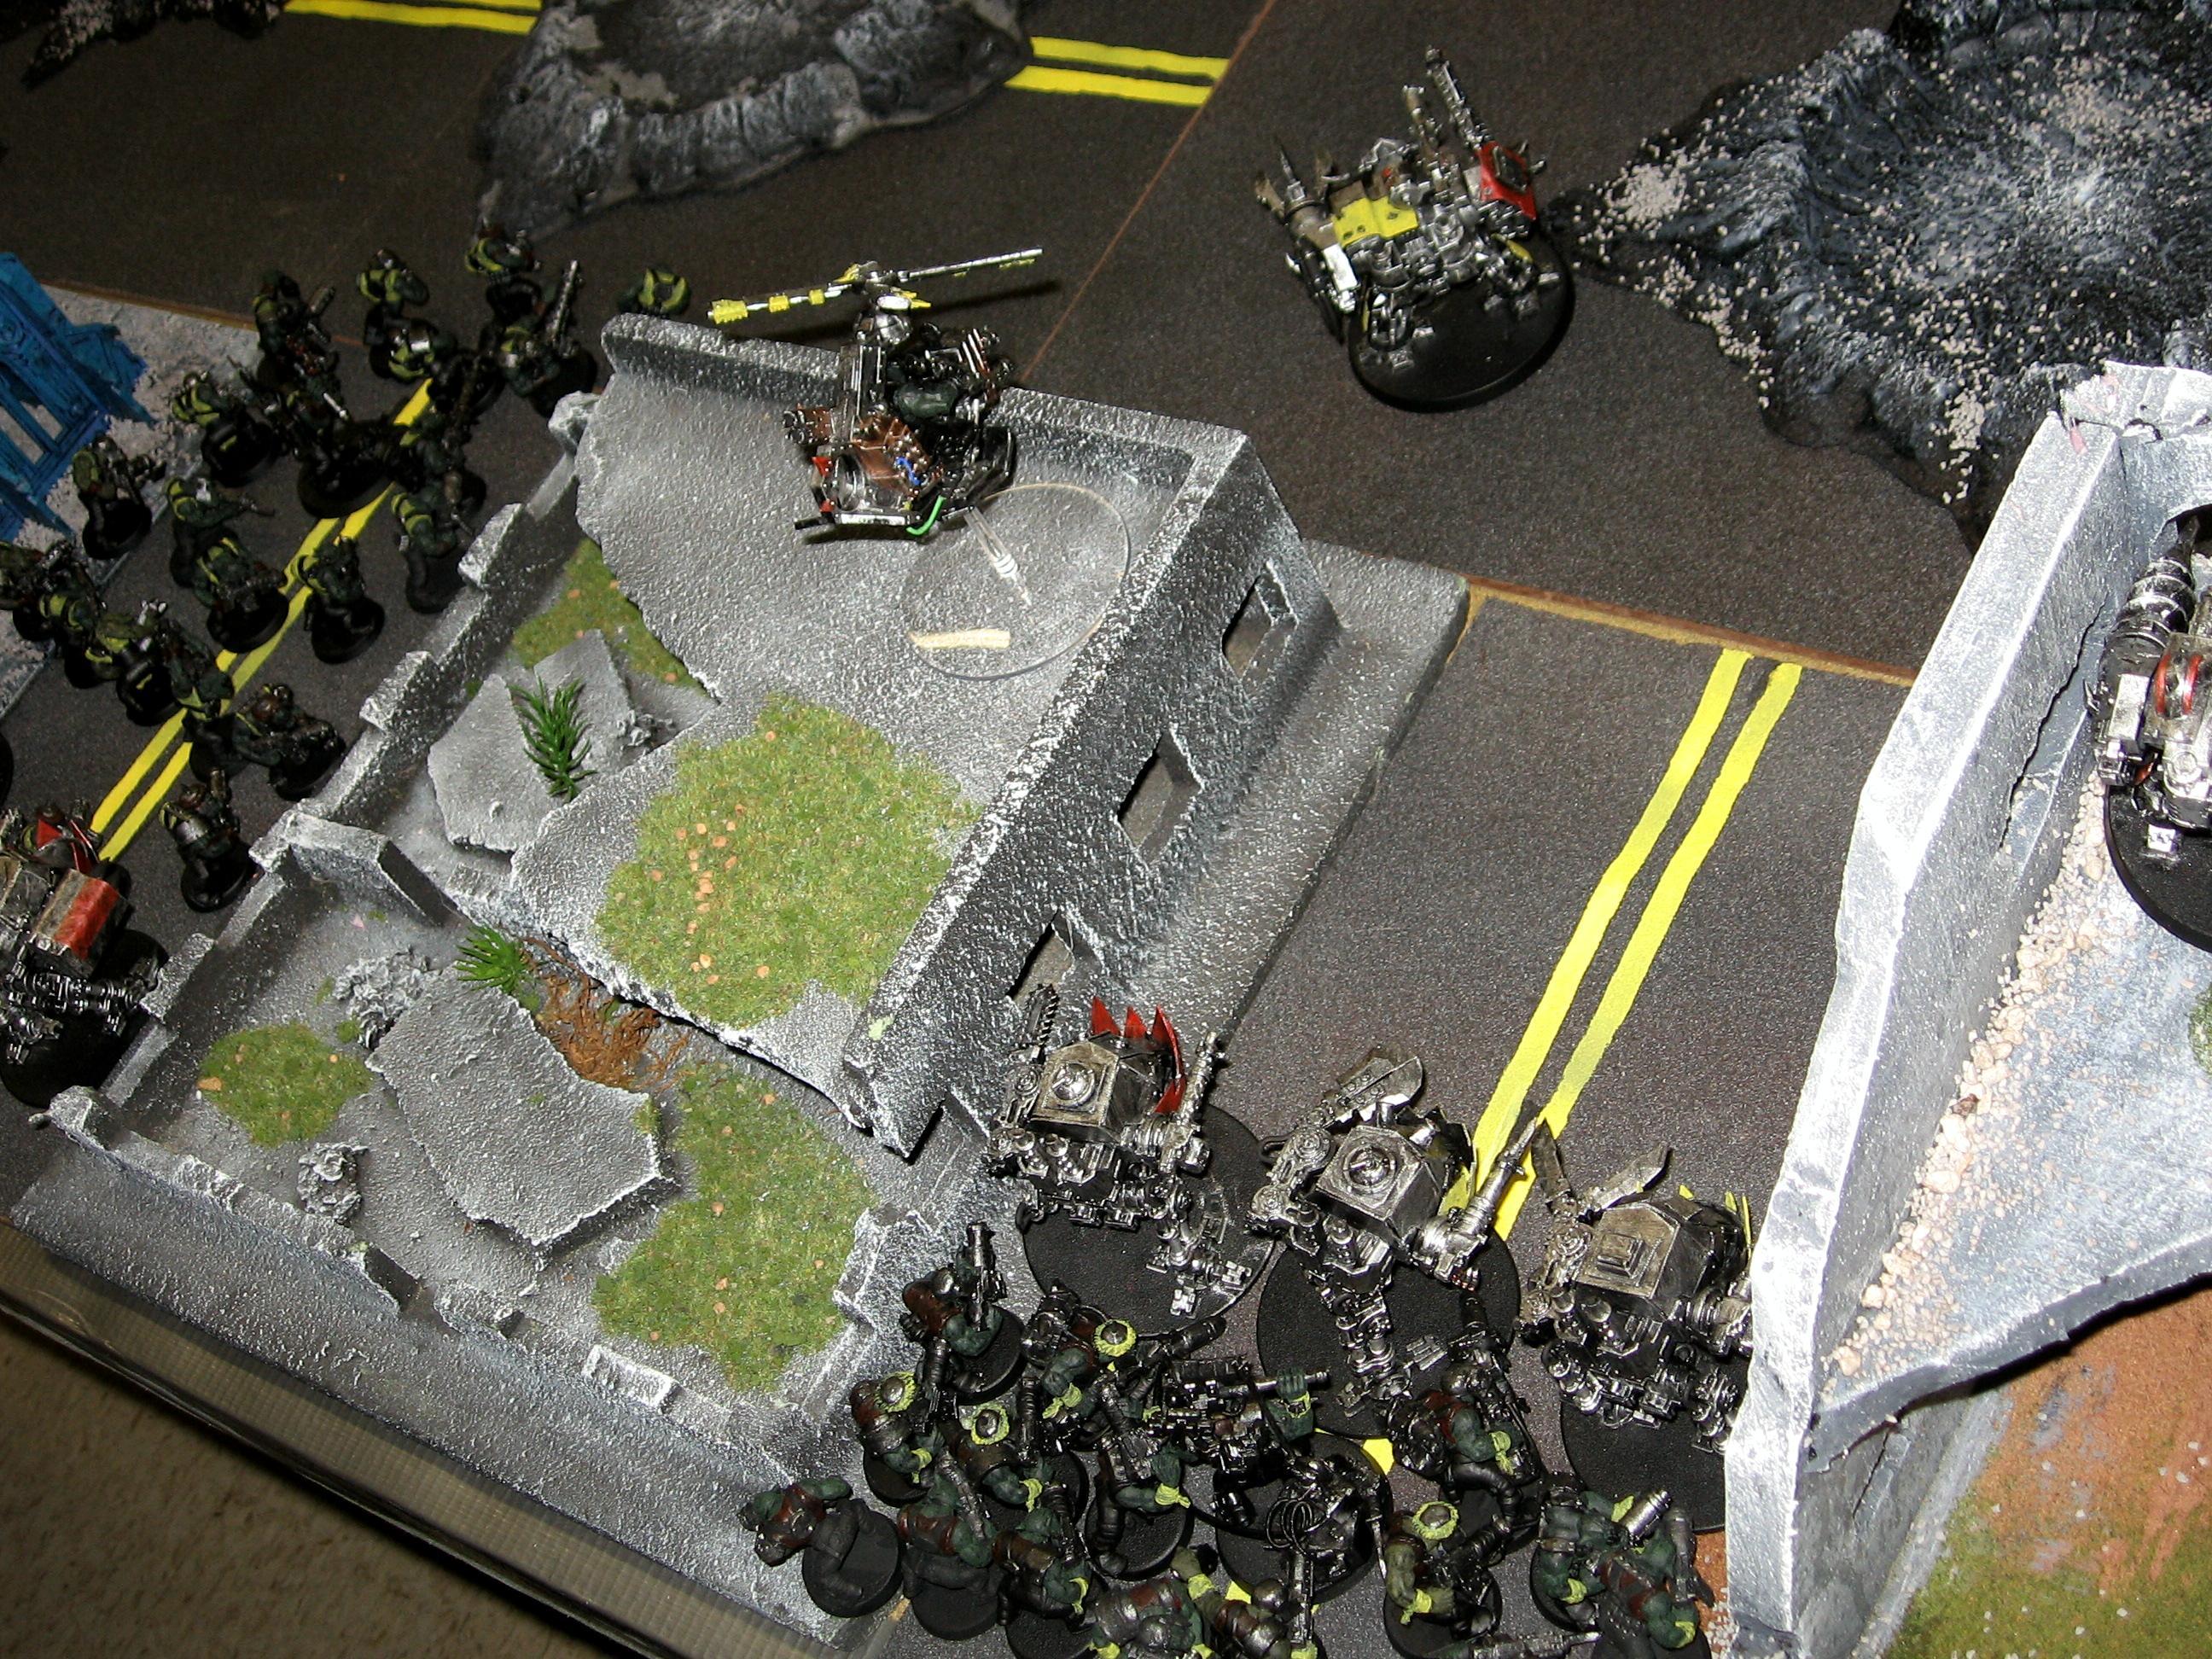 Orks come in from off field